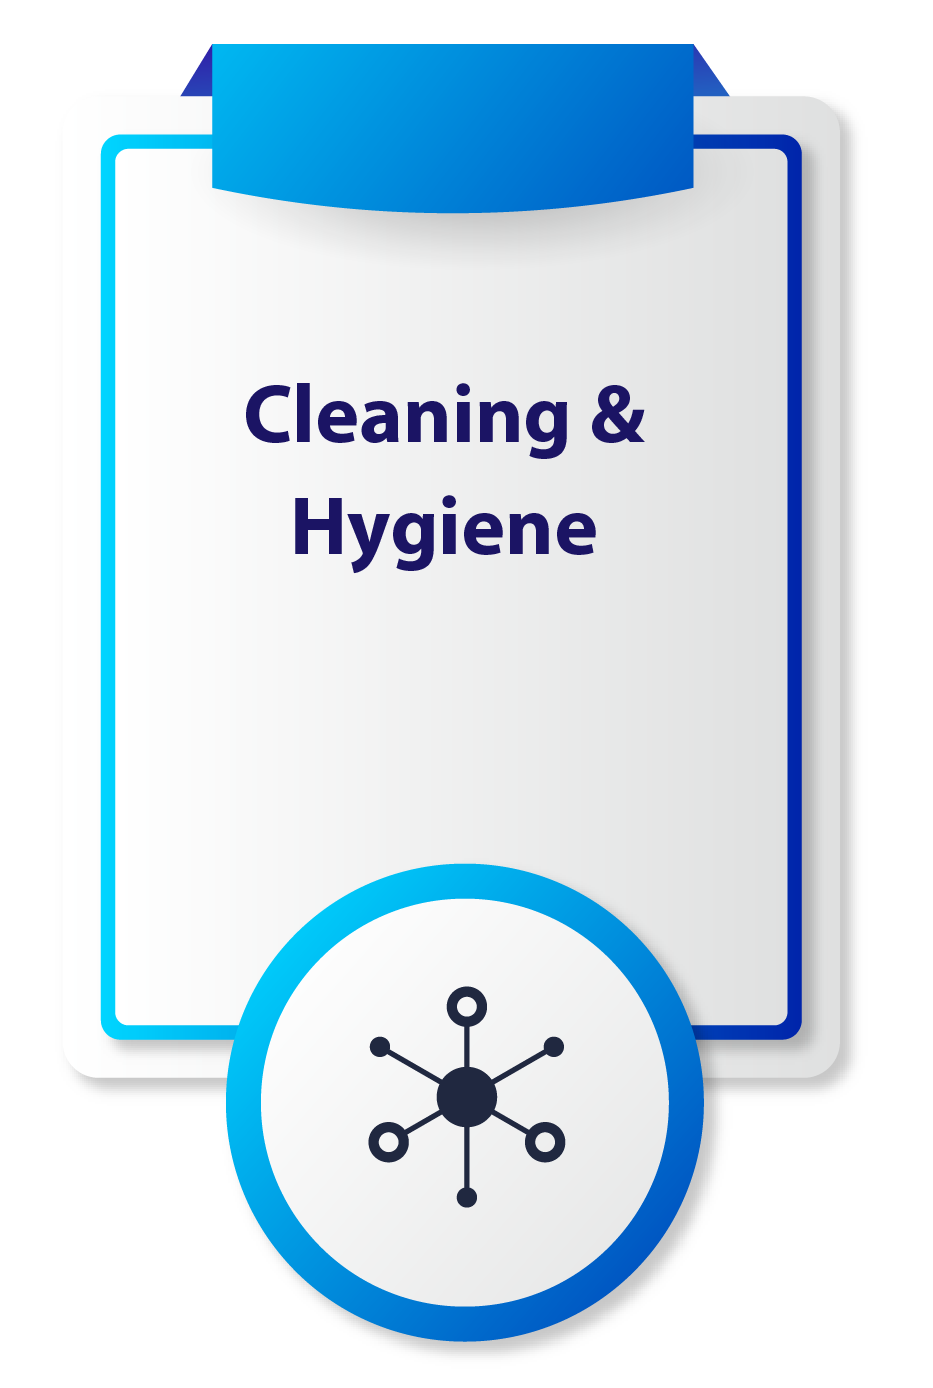 Cleaning & Hygiene